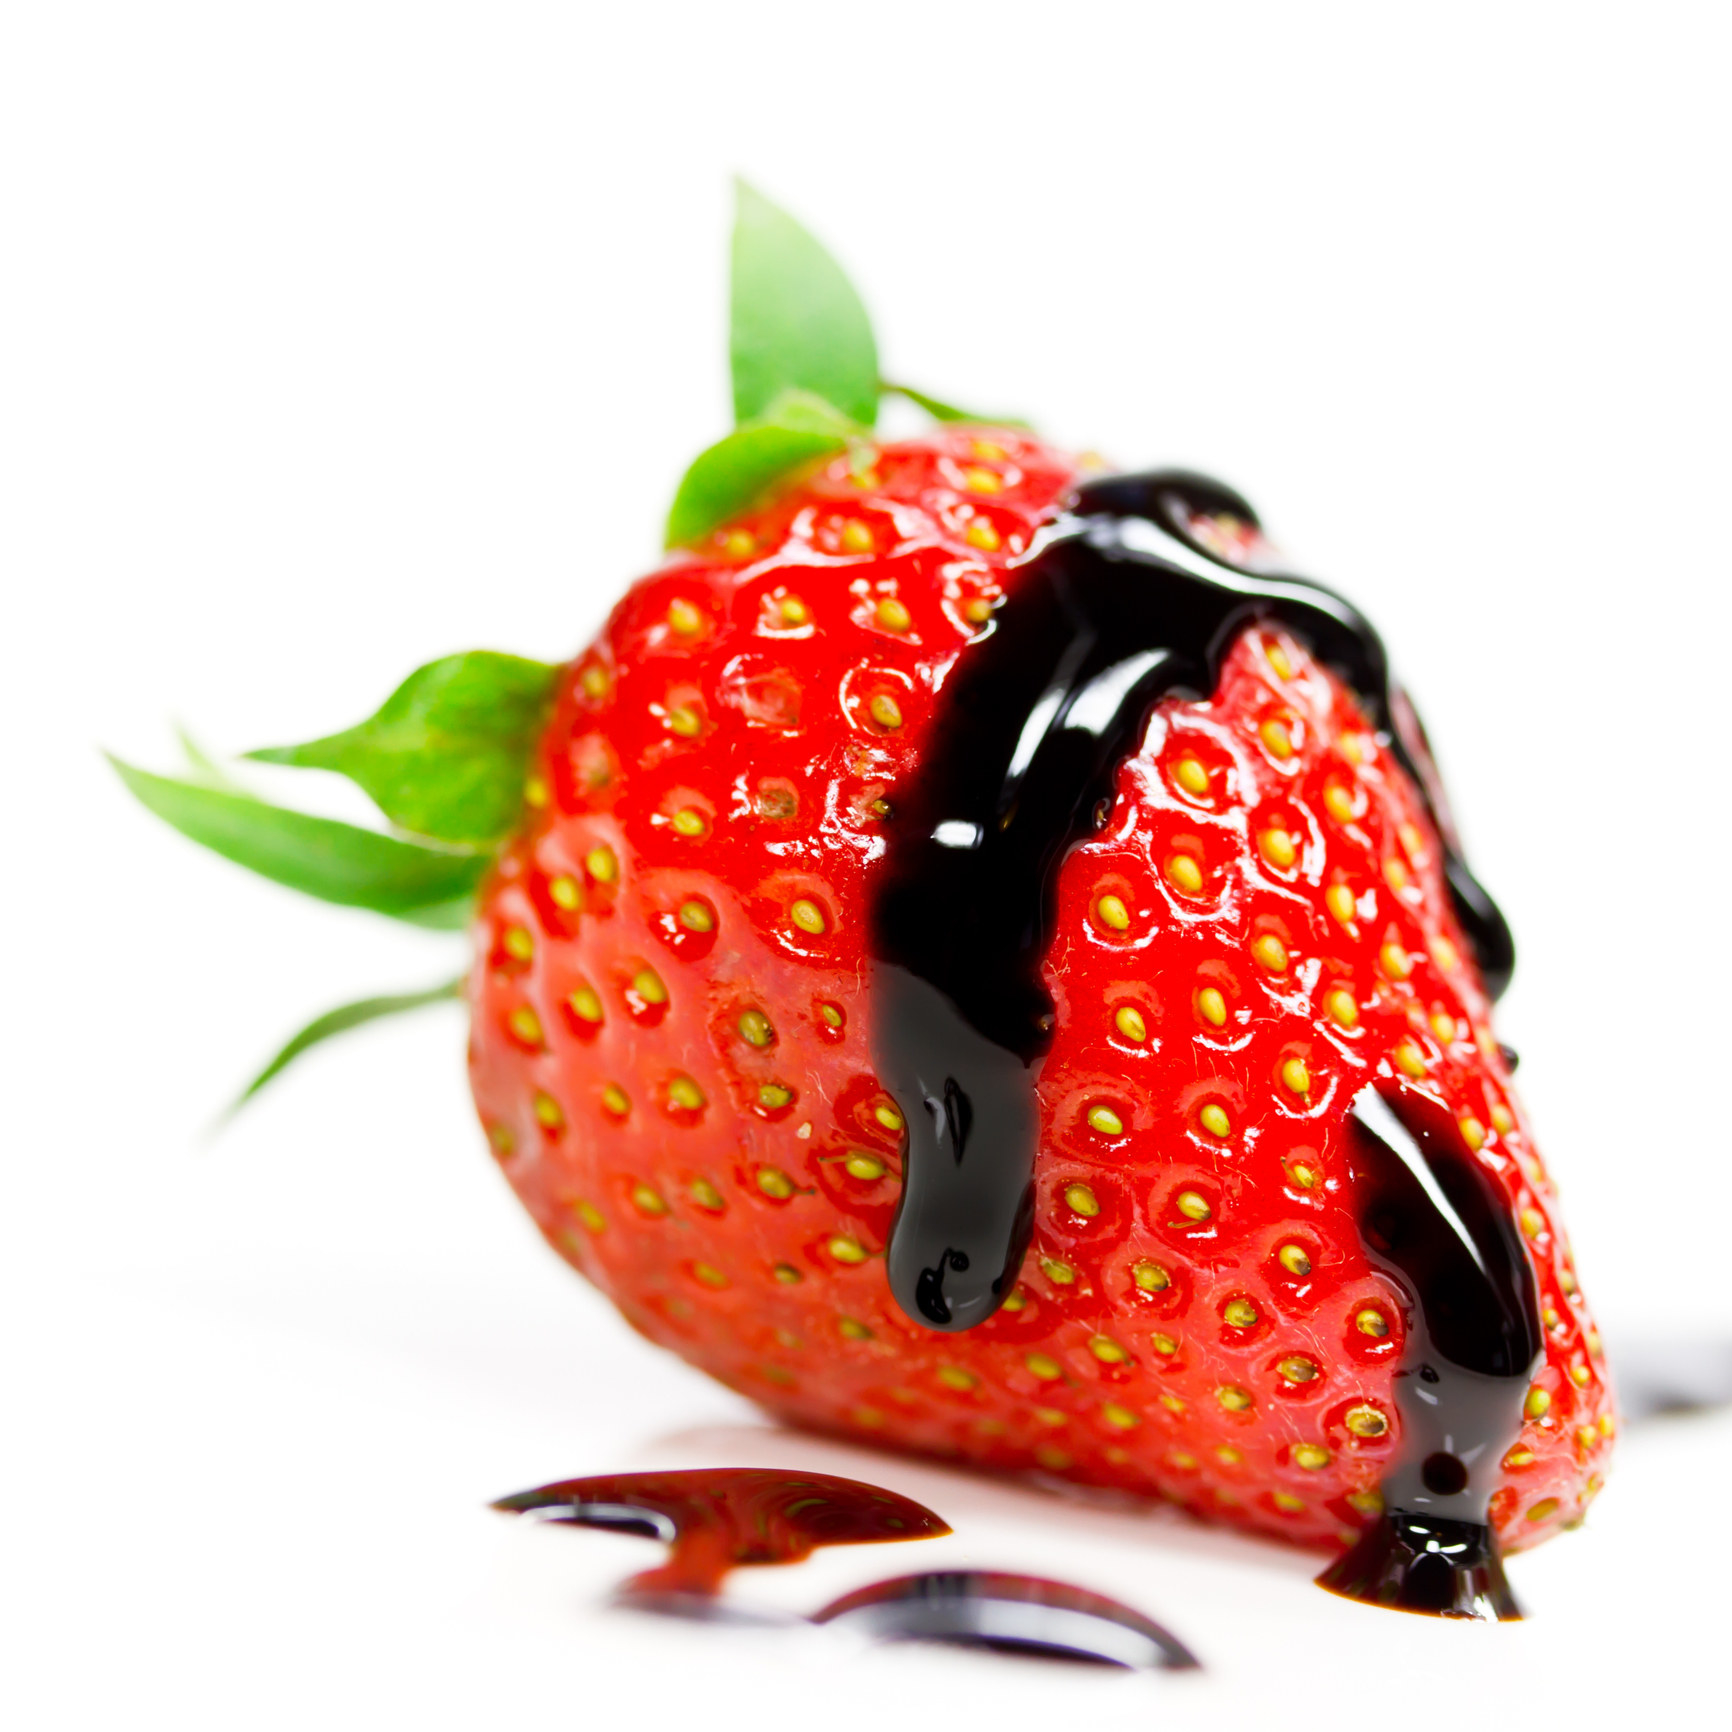 A close up shot of a strawberry with a drizzle of balsamic vinegar on top on a white background.